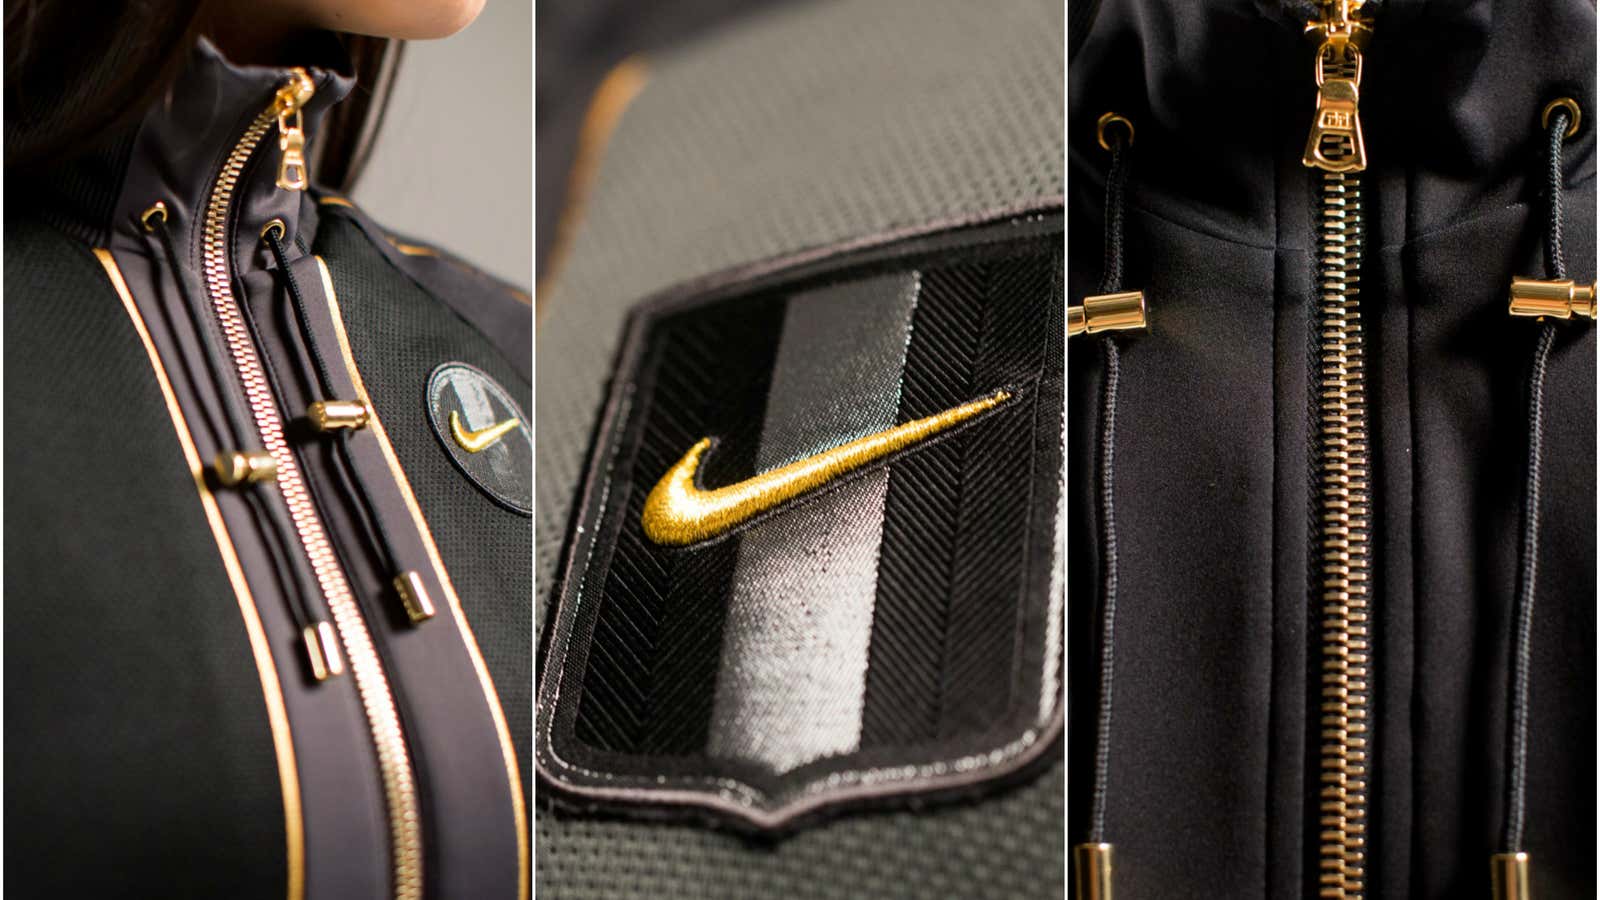 All black-and-gold everything.